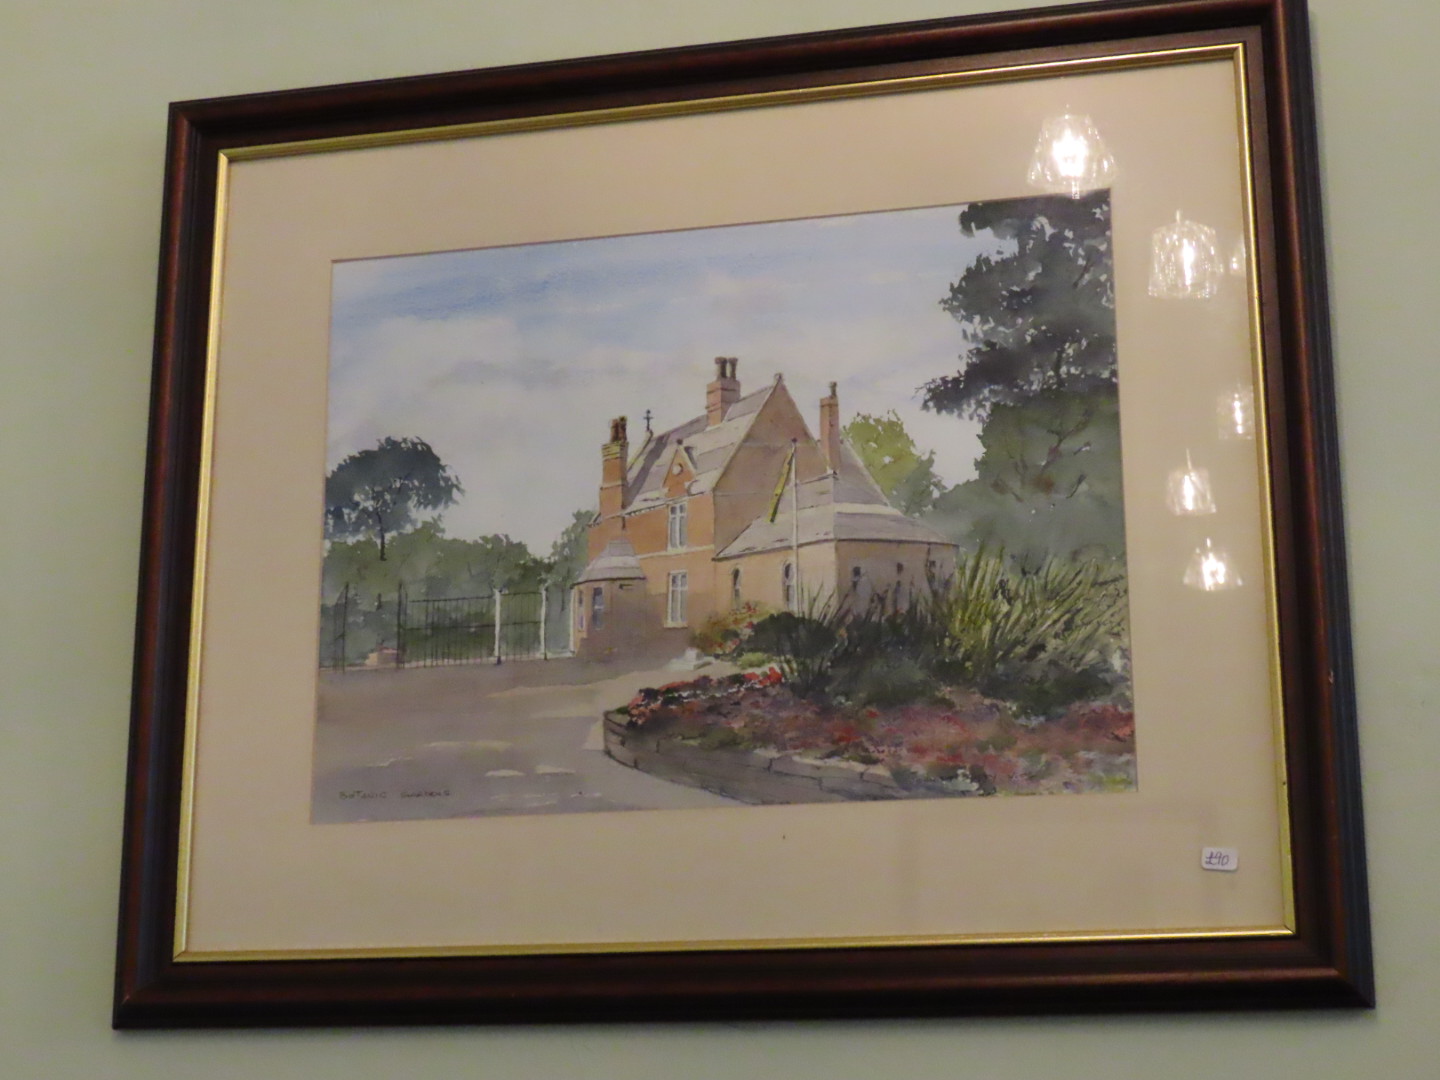 A special exhibition, John Duffy Watercolours, is taking place at Wayfarers Arcade on Lord Street in Southport town centre in collaboration with Johns family and The Rotary Club of Southport. Botanic Gardens in Churchtown. Photo by Andrew Brown Media